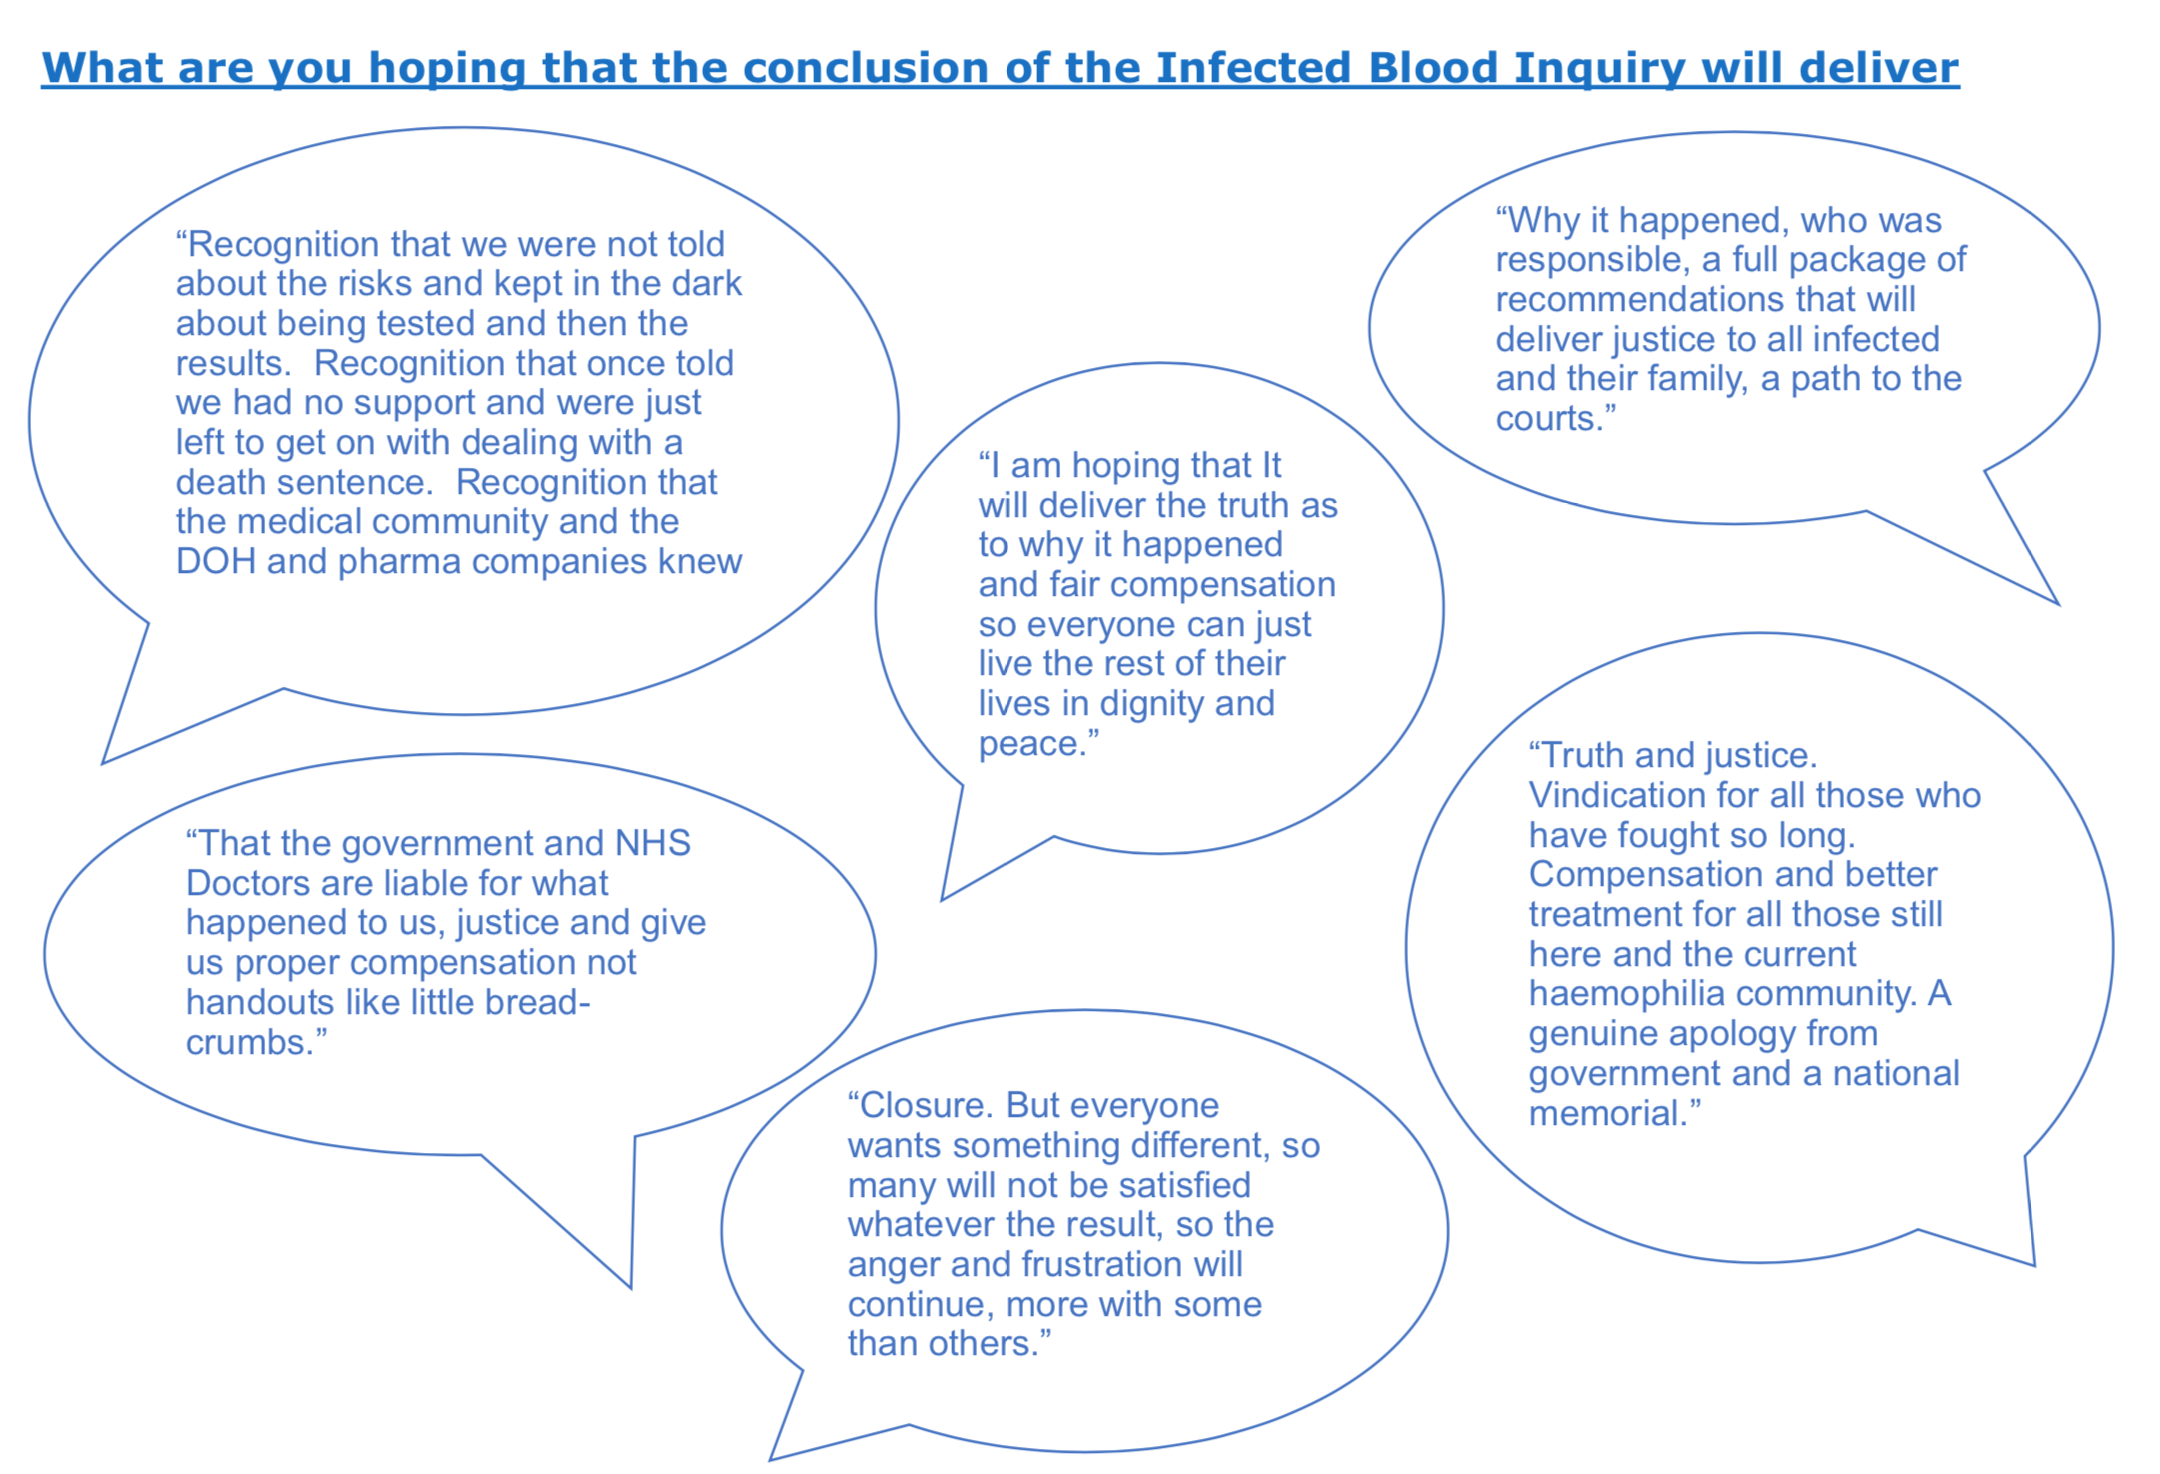 Opinions on what people hope the Infected Blood Inquiry will deliver